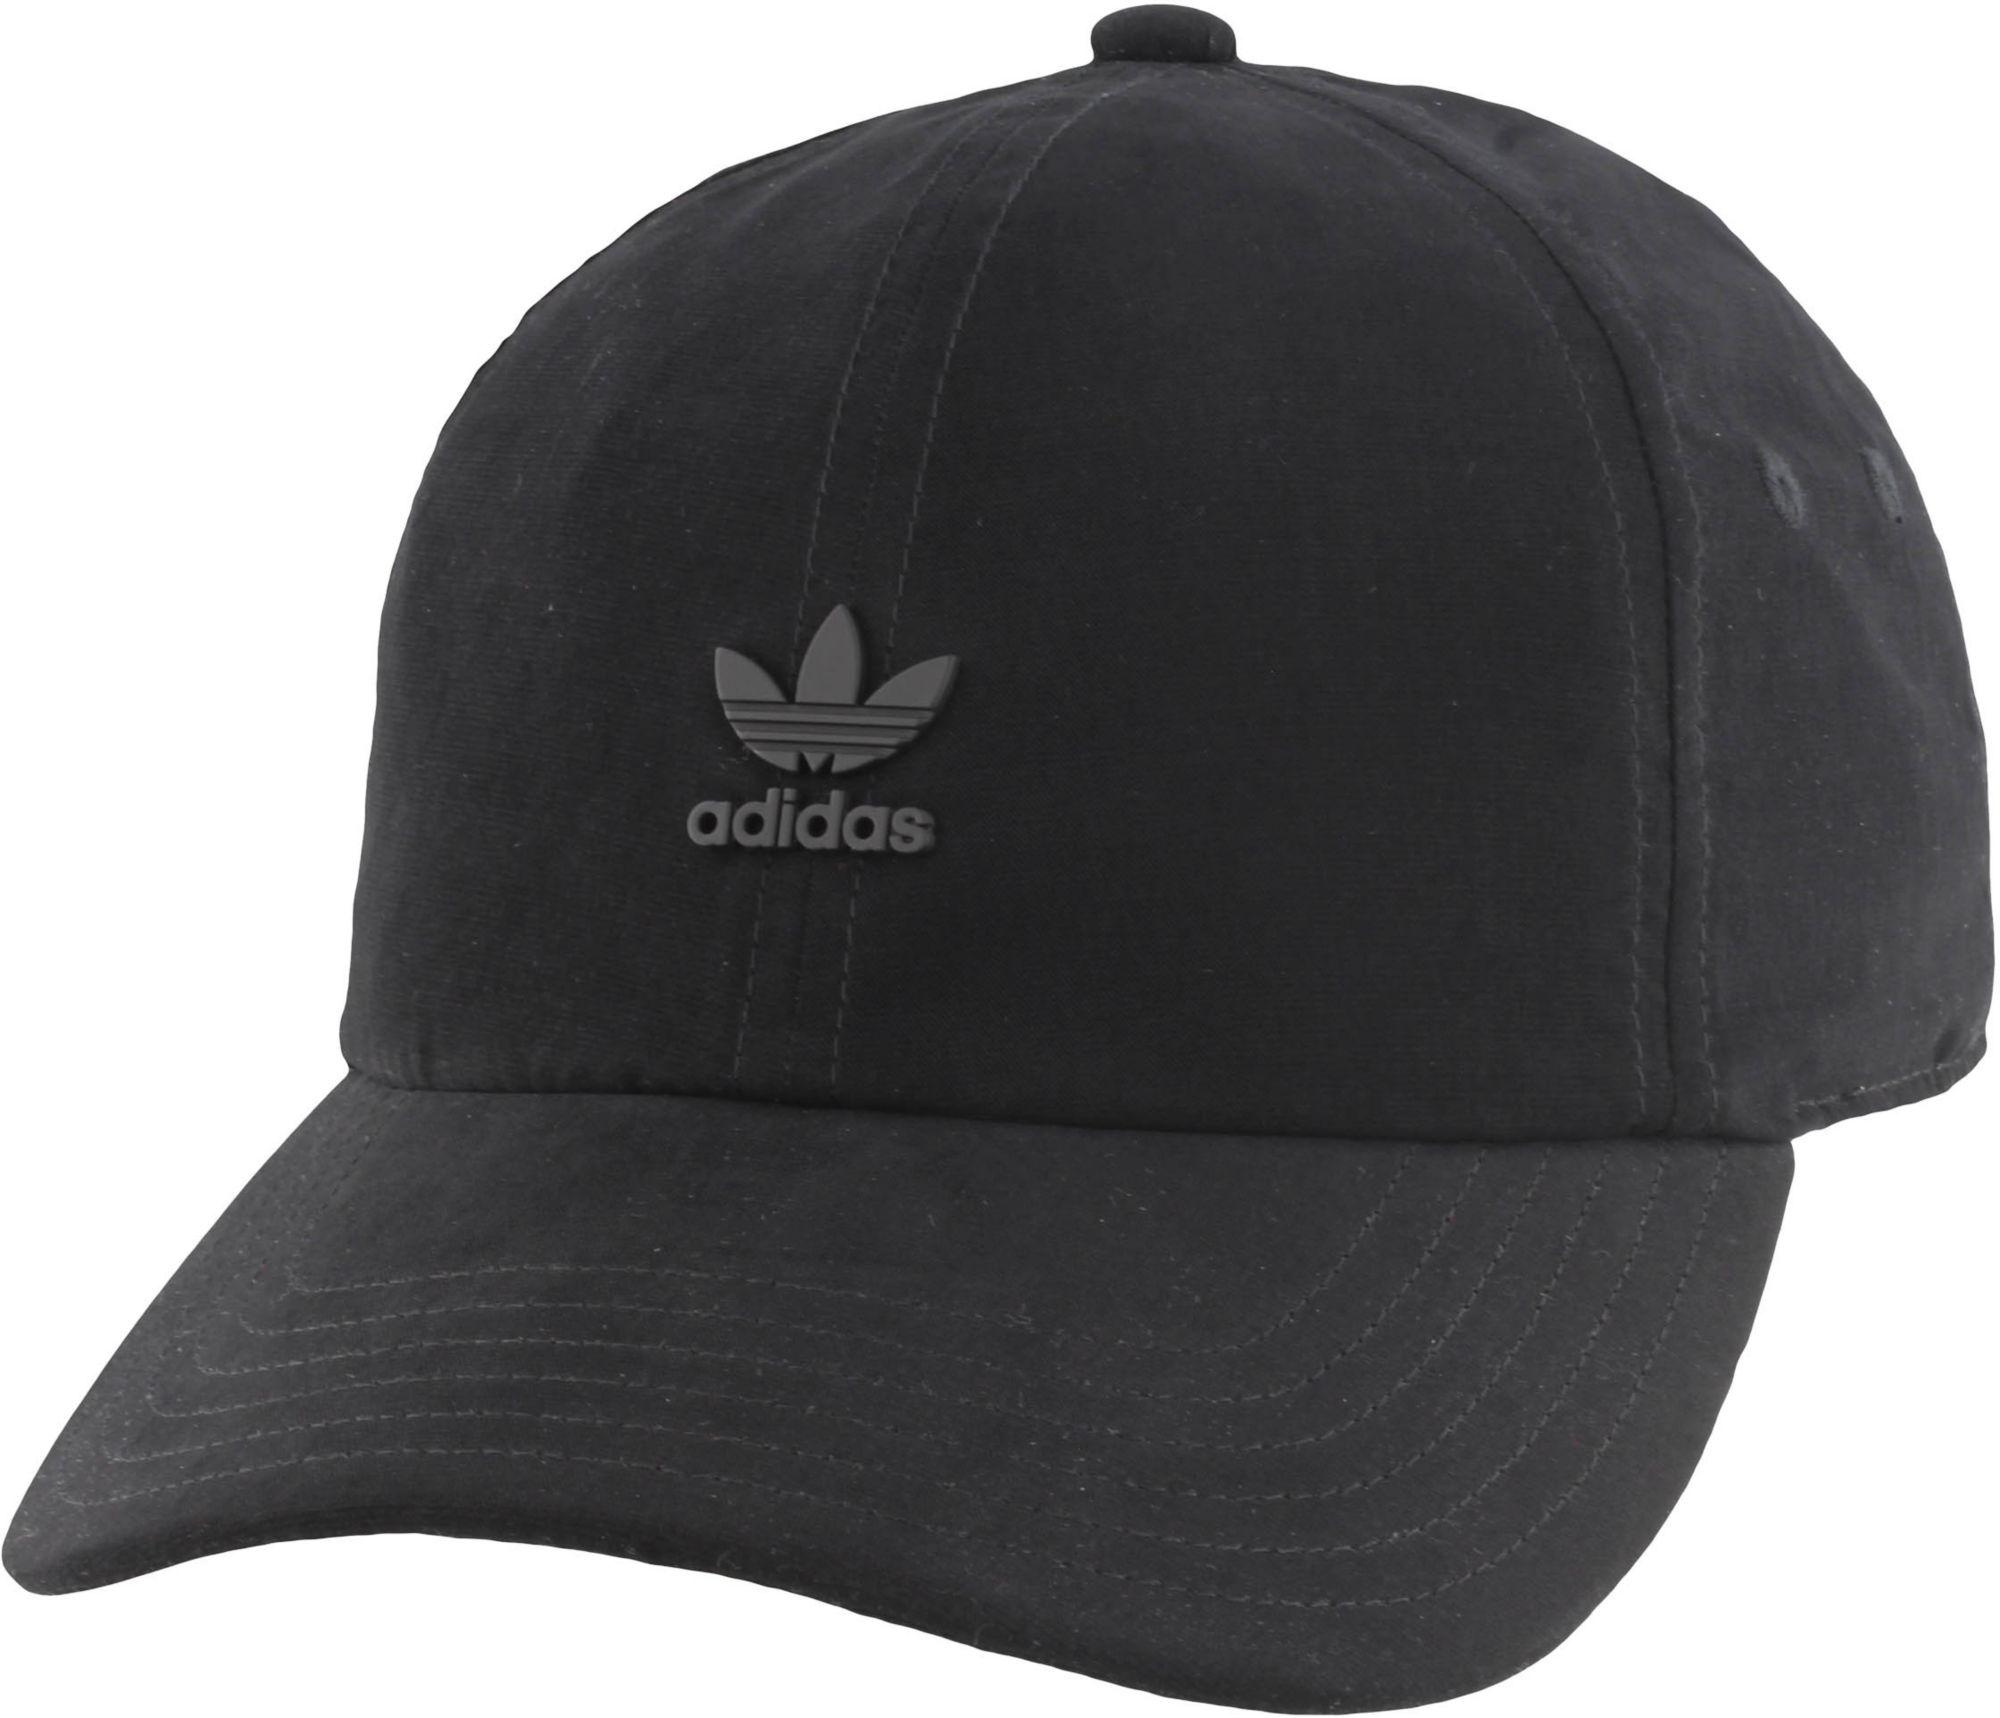 adidas Originals Relaxed Metal Strapback Hat in Black for Men - Lyst